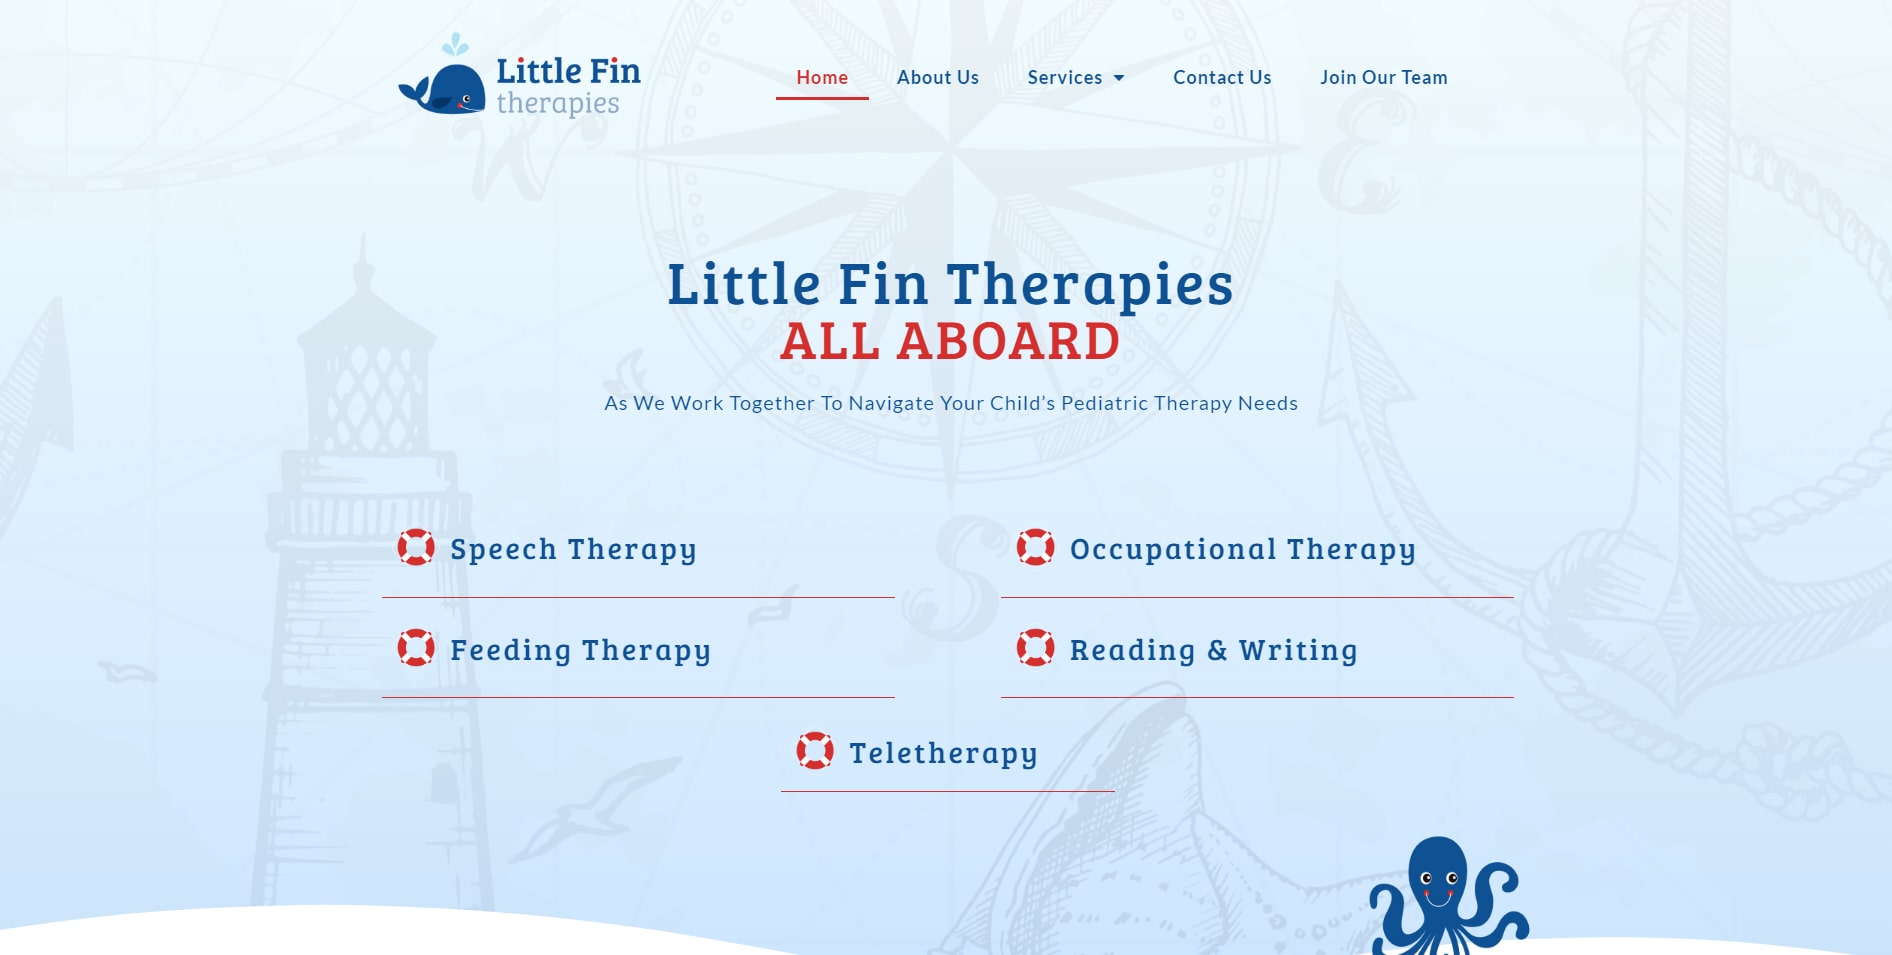 Little Fin Therapies